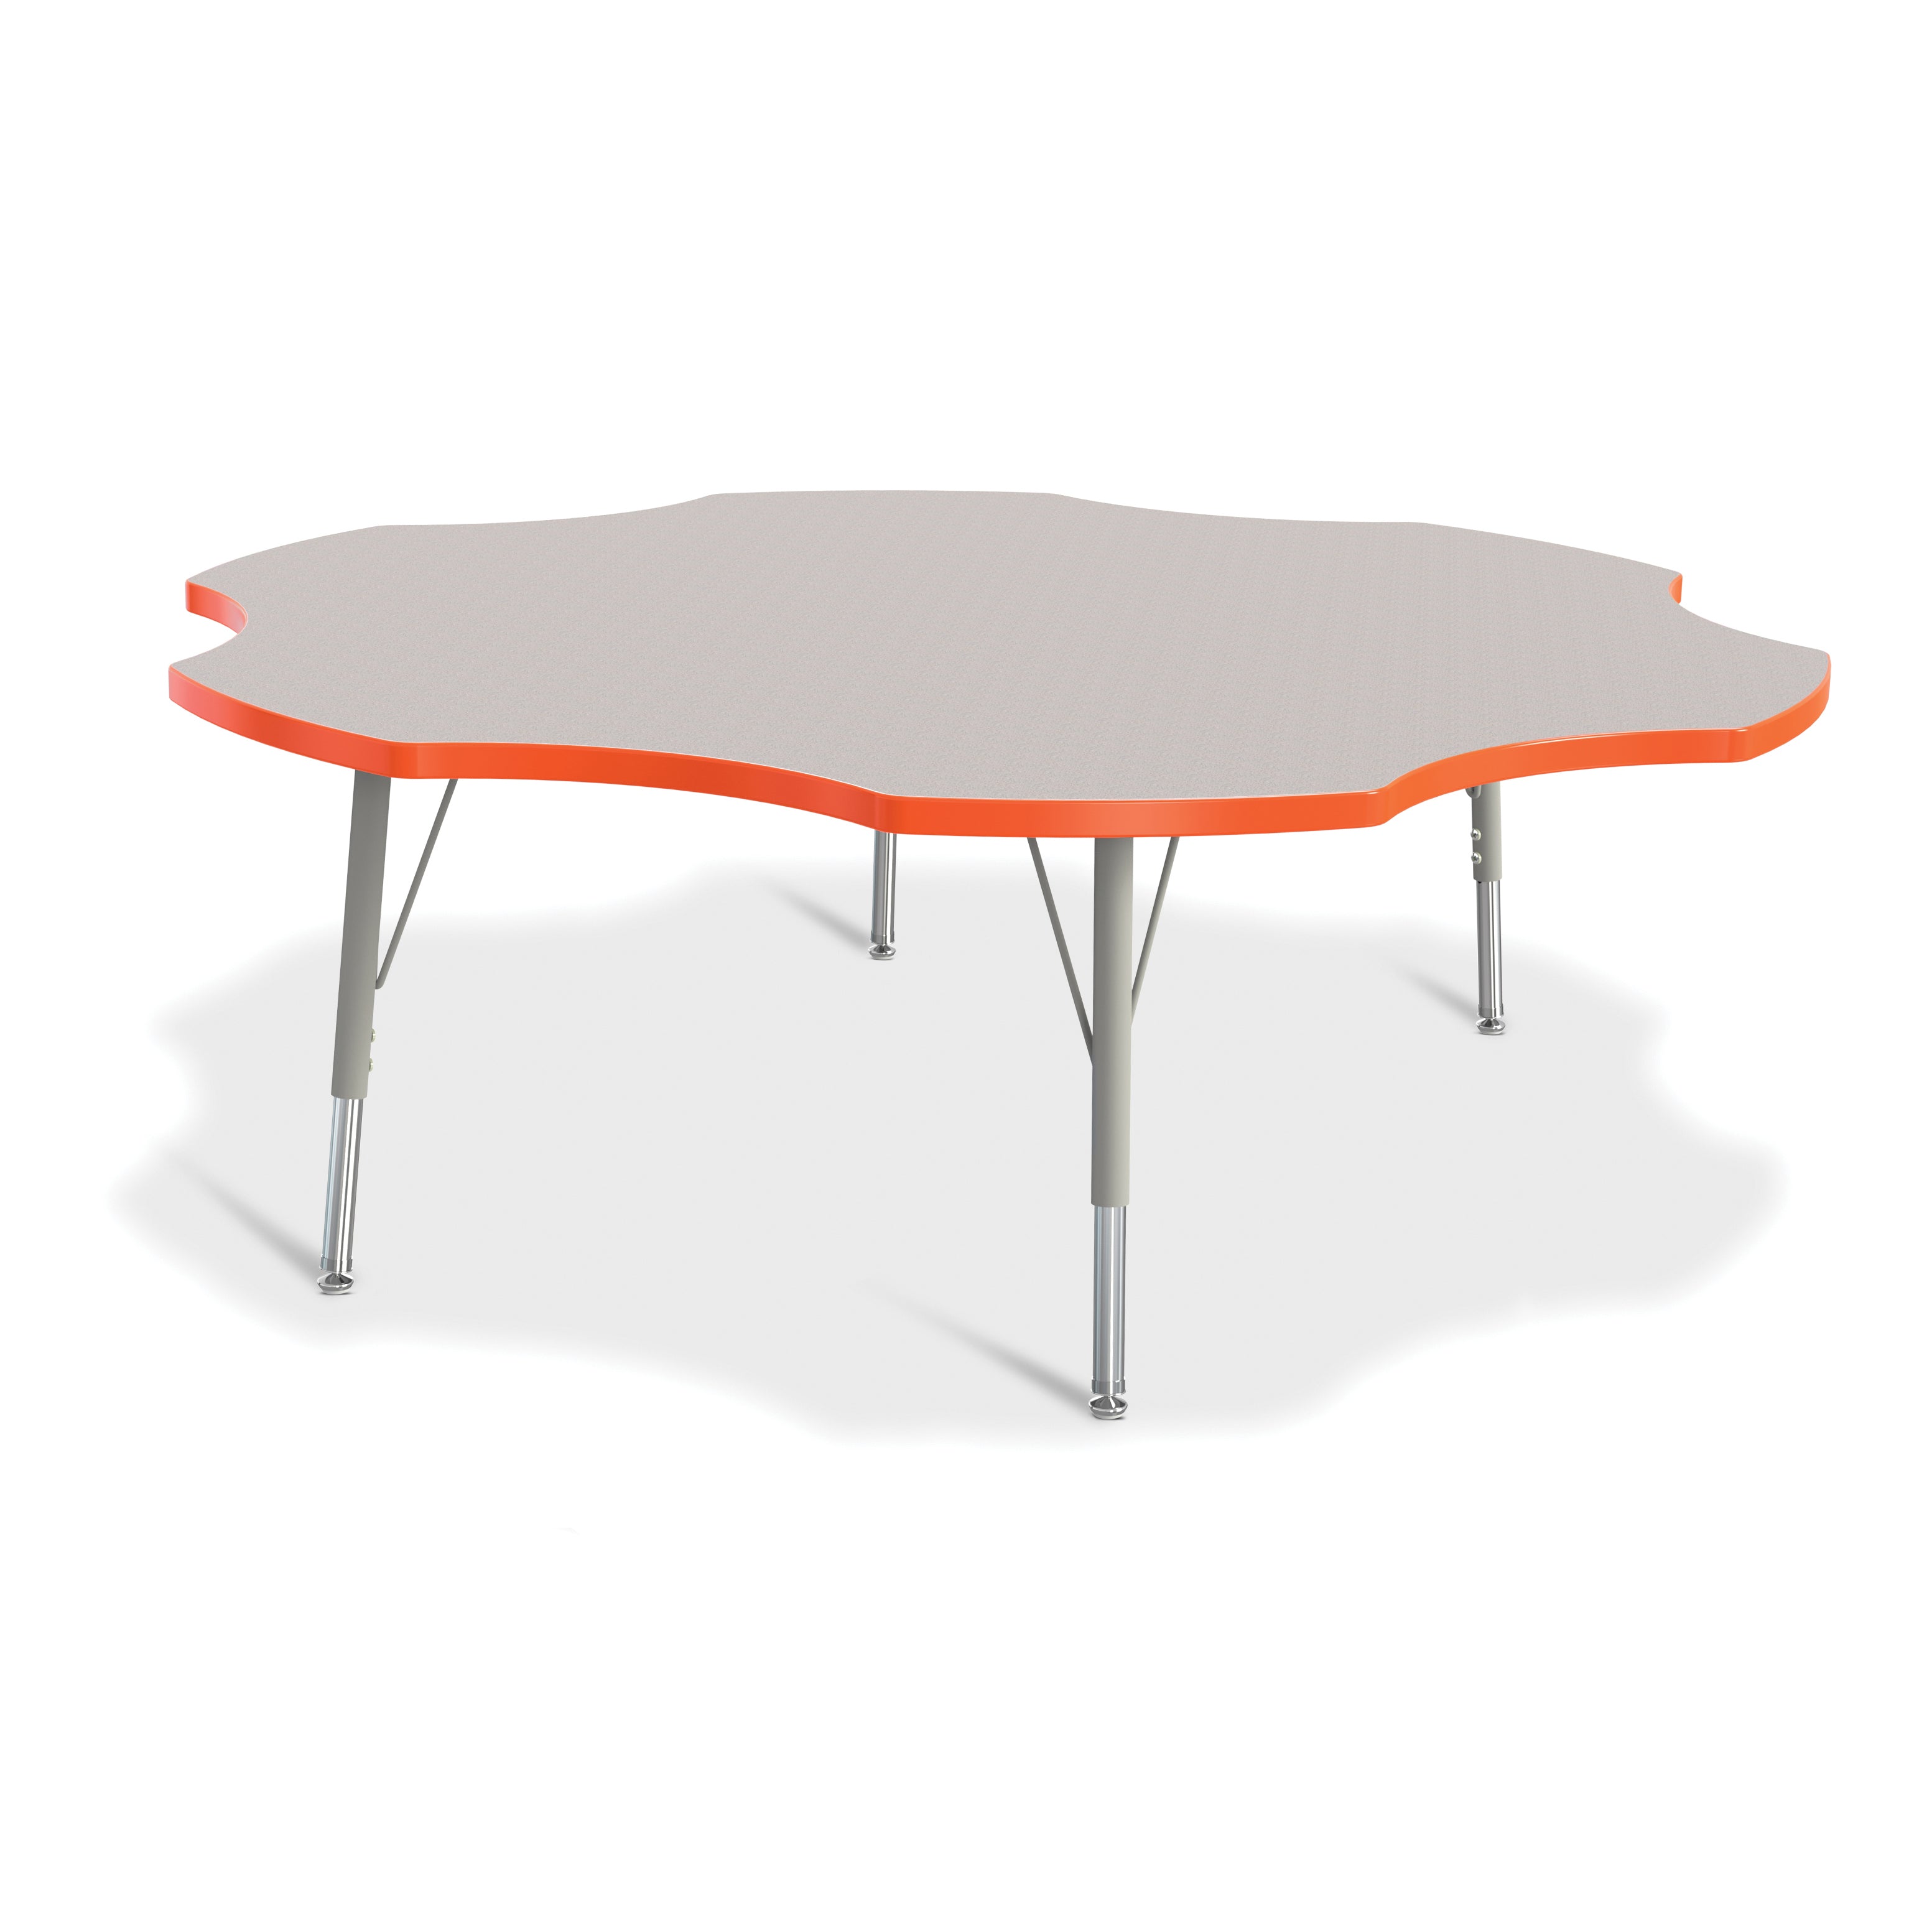 6458JCE114, Berries Six Leaf Activity Table - 60", E-height - Freckled Gray/Orange/Gray